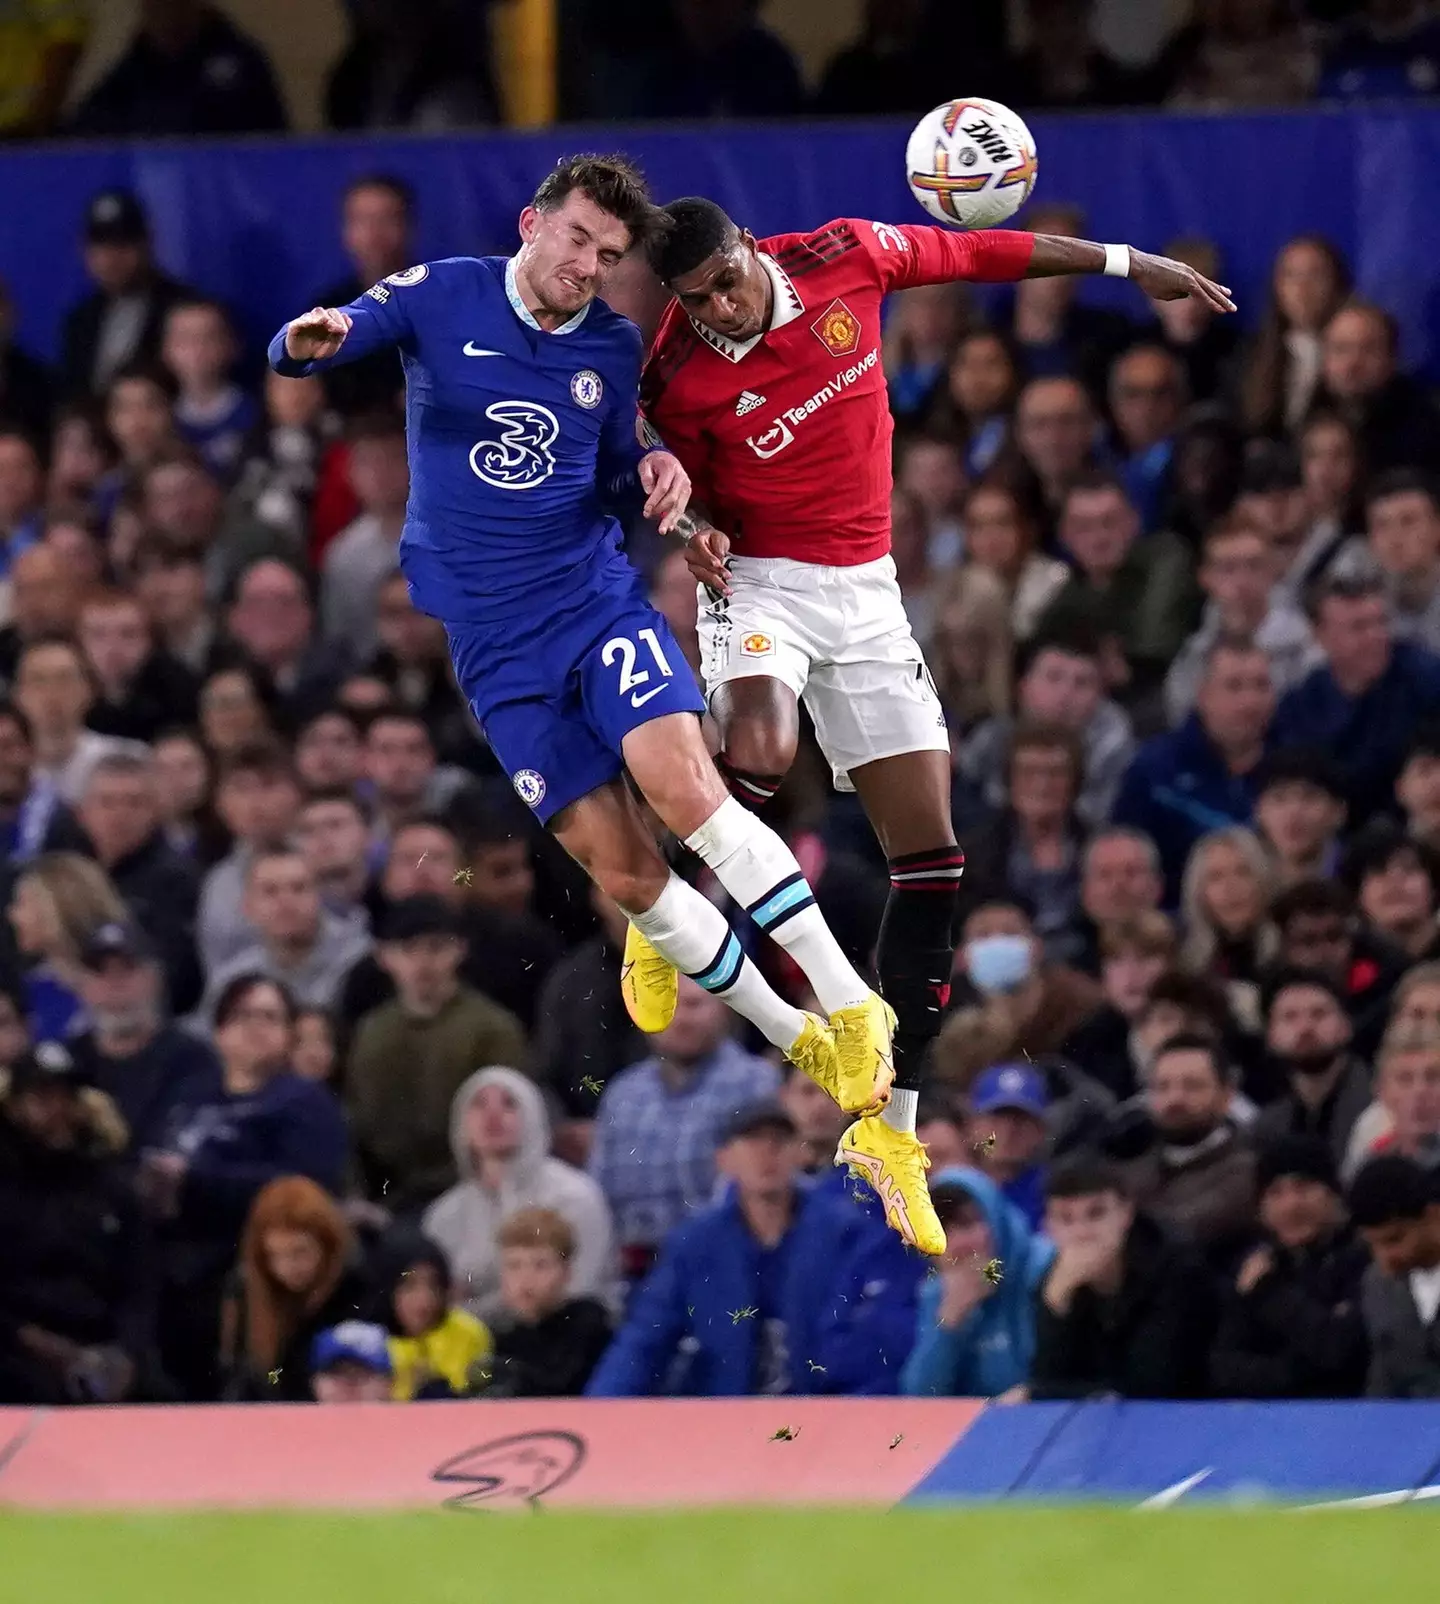 Chelsea's Ben Chilwell (left) and Manchester United's Marcus Rashford battle for the ball during the Premier League match at Stamford Bridge. (Alamy)